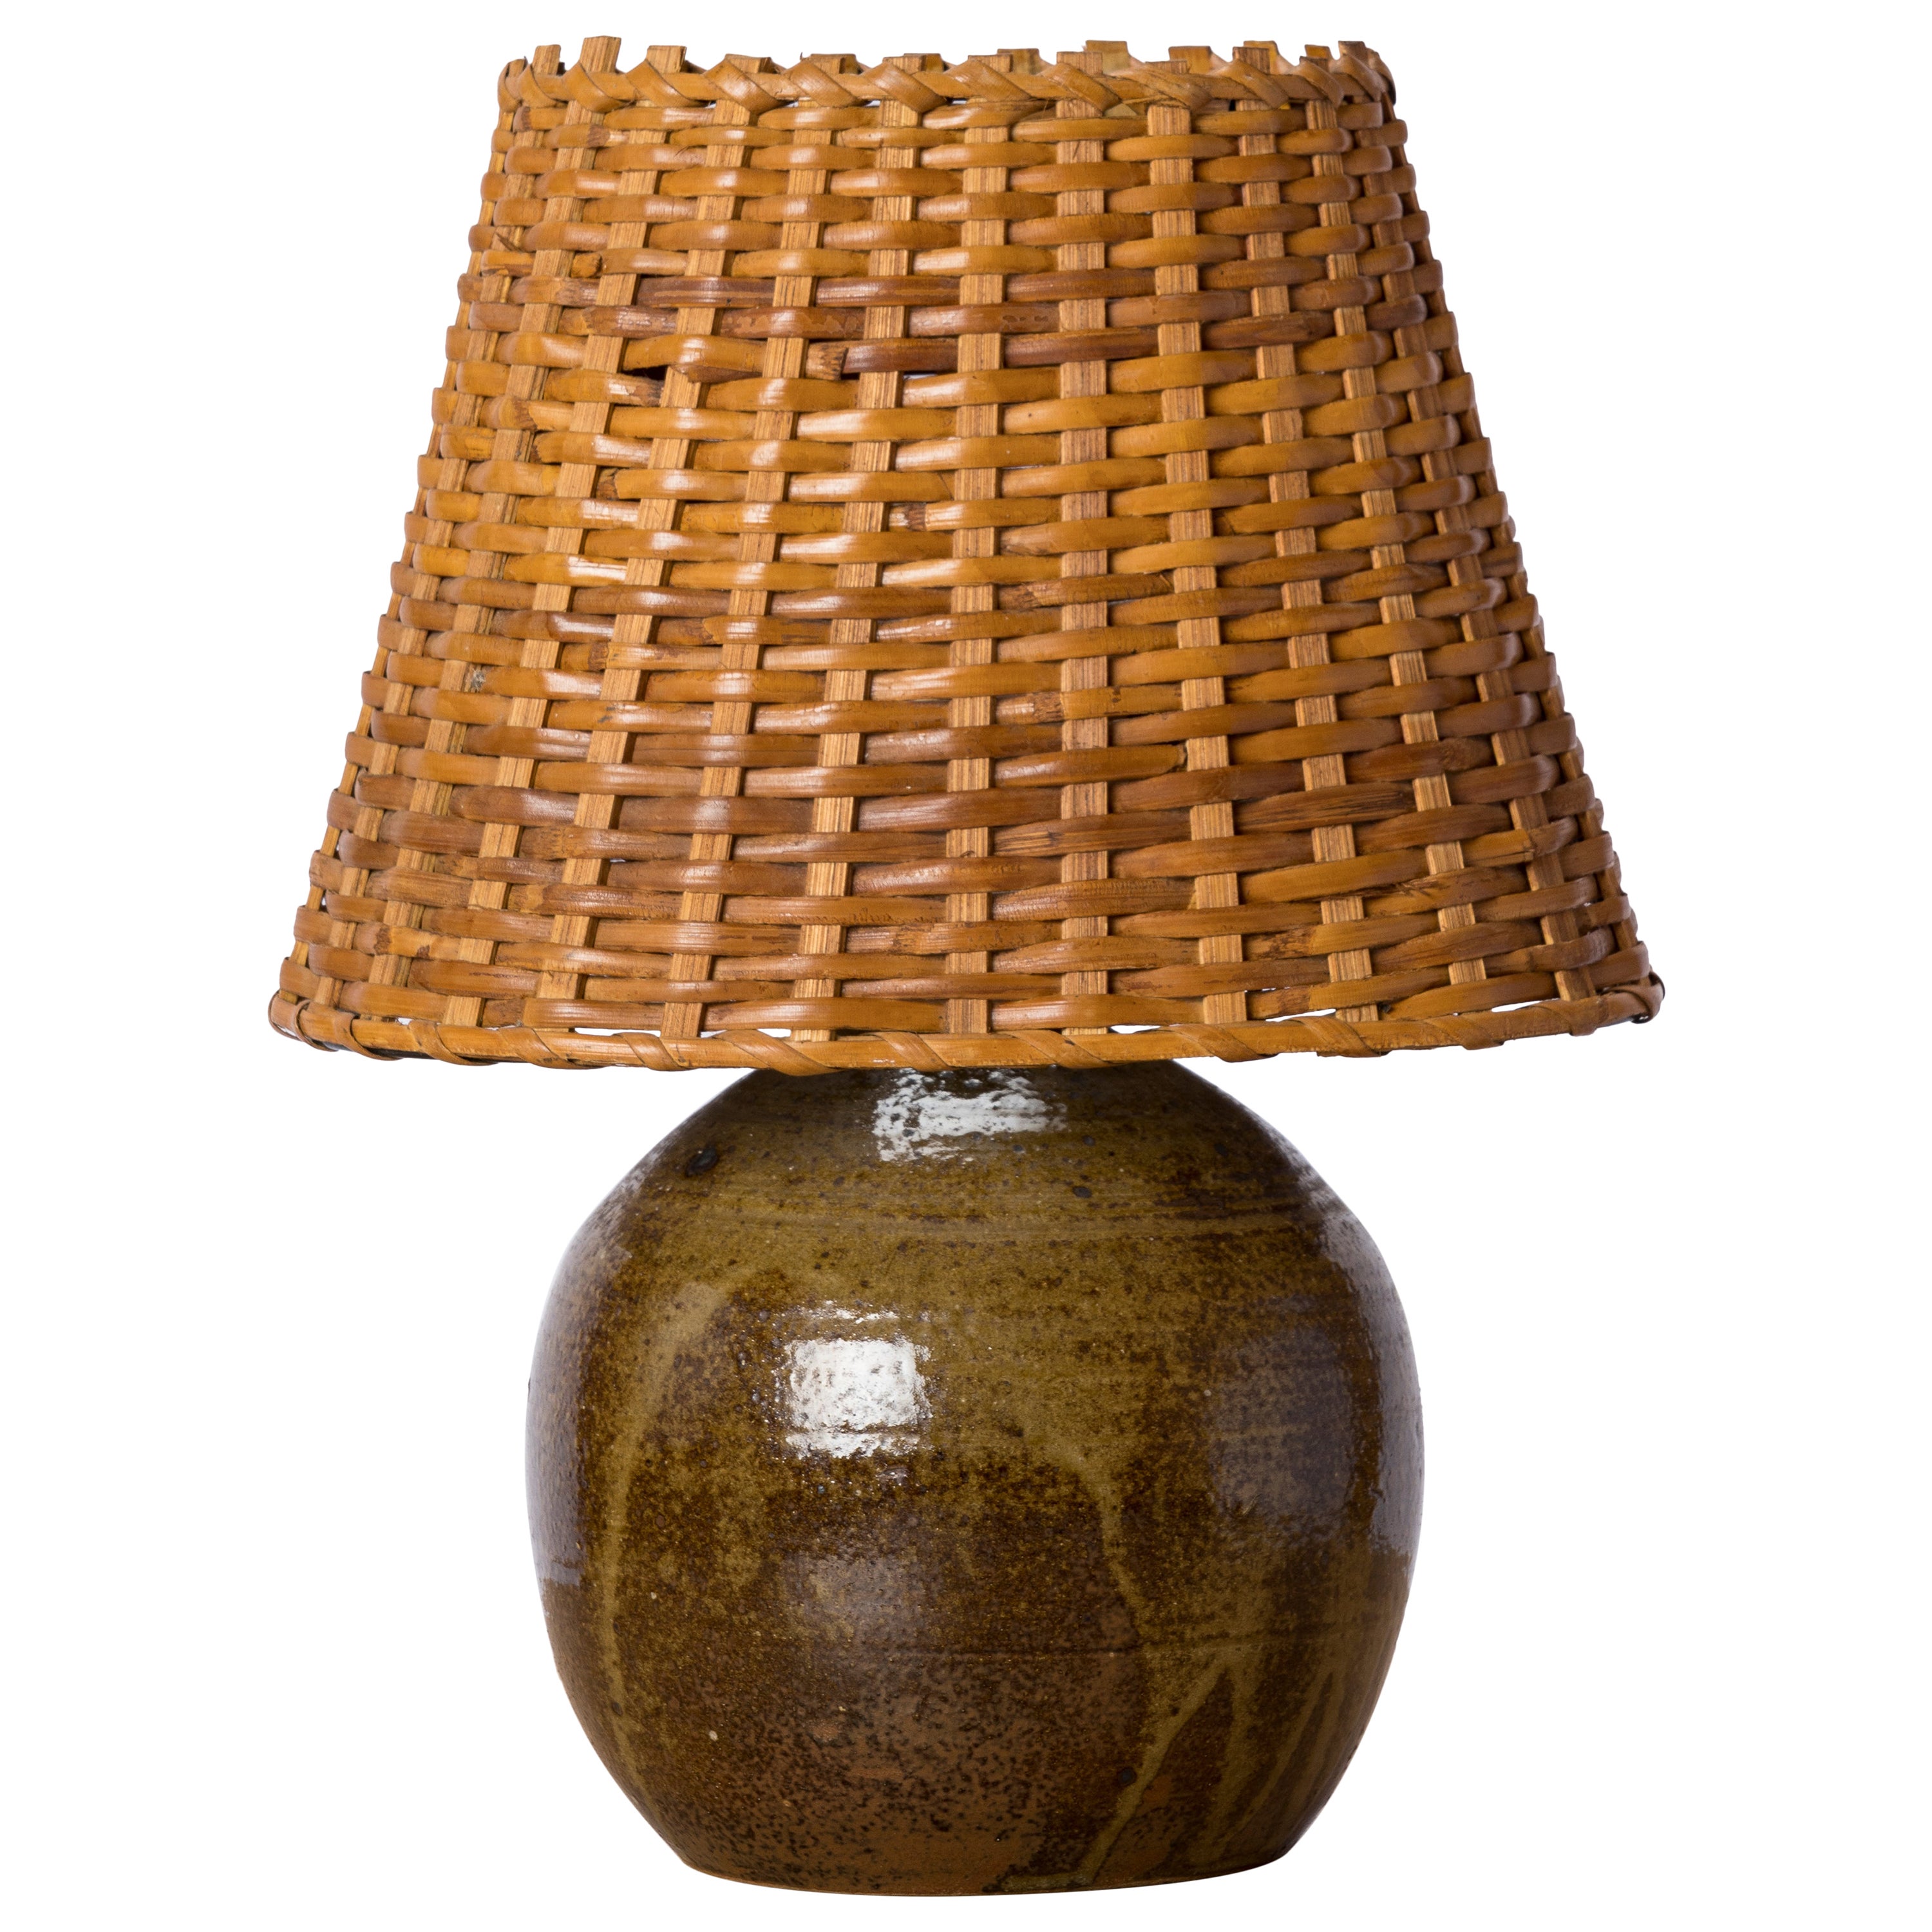 Shades of Green Petite Ceramic Table Lamp w. Wicker Shade - France 1970's For Sale